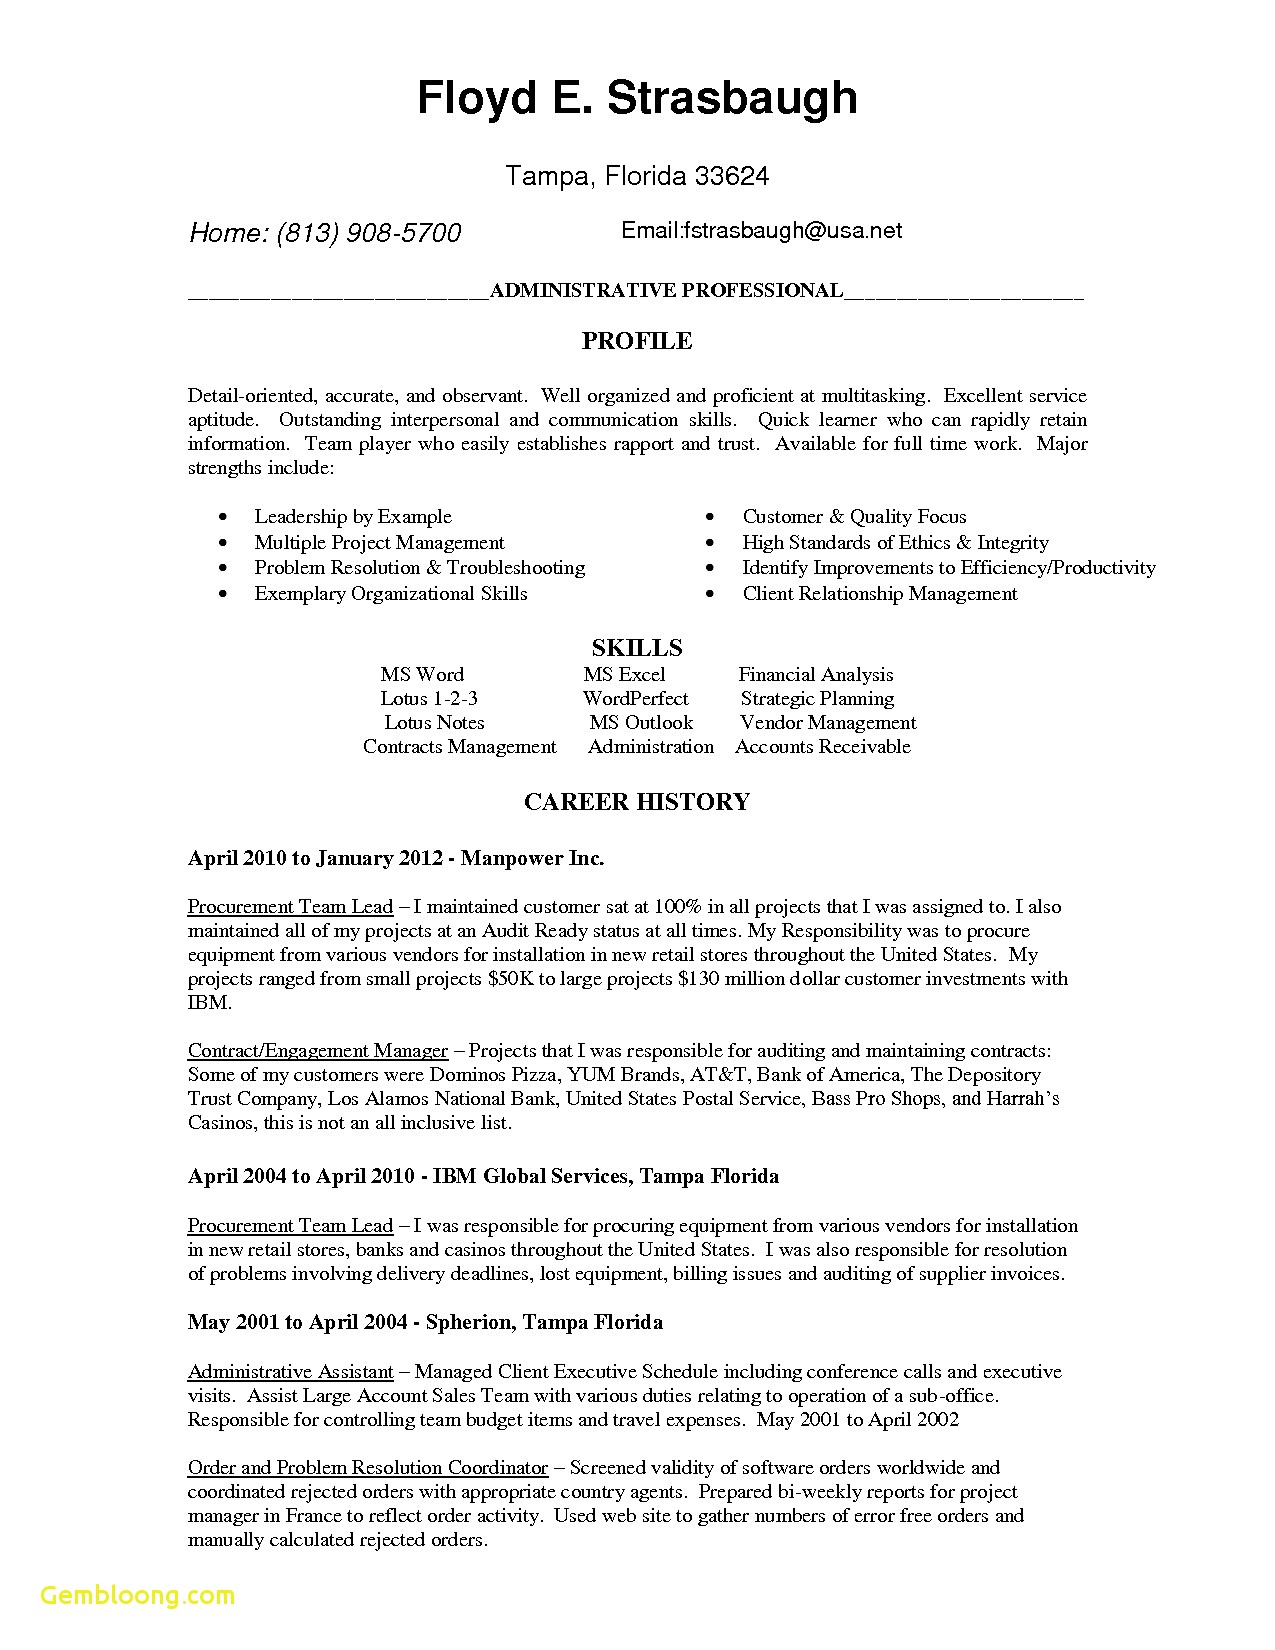 Support Letter Template - Technical Support Specialist Resume Professional Job Resume Template